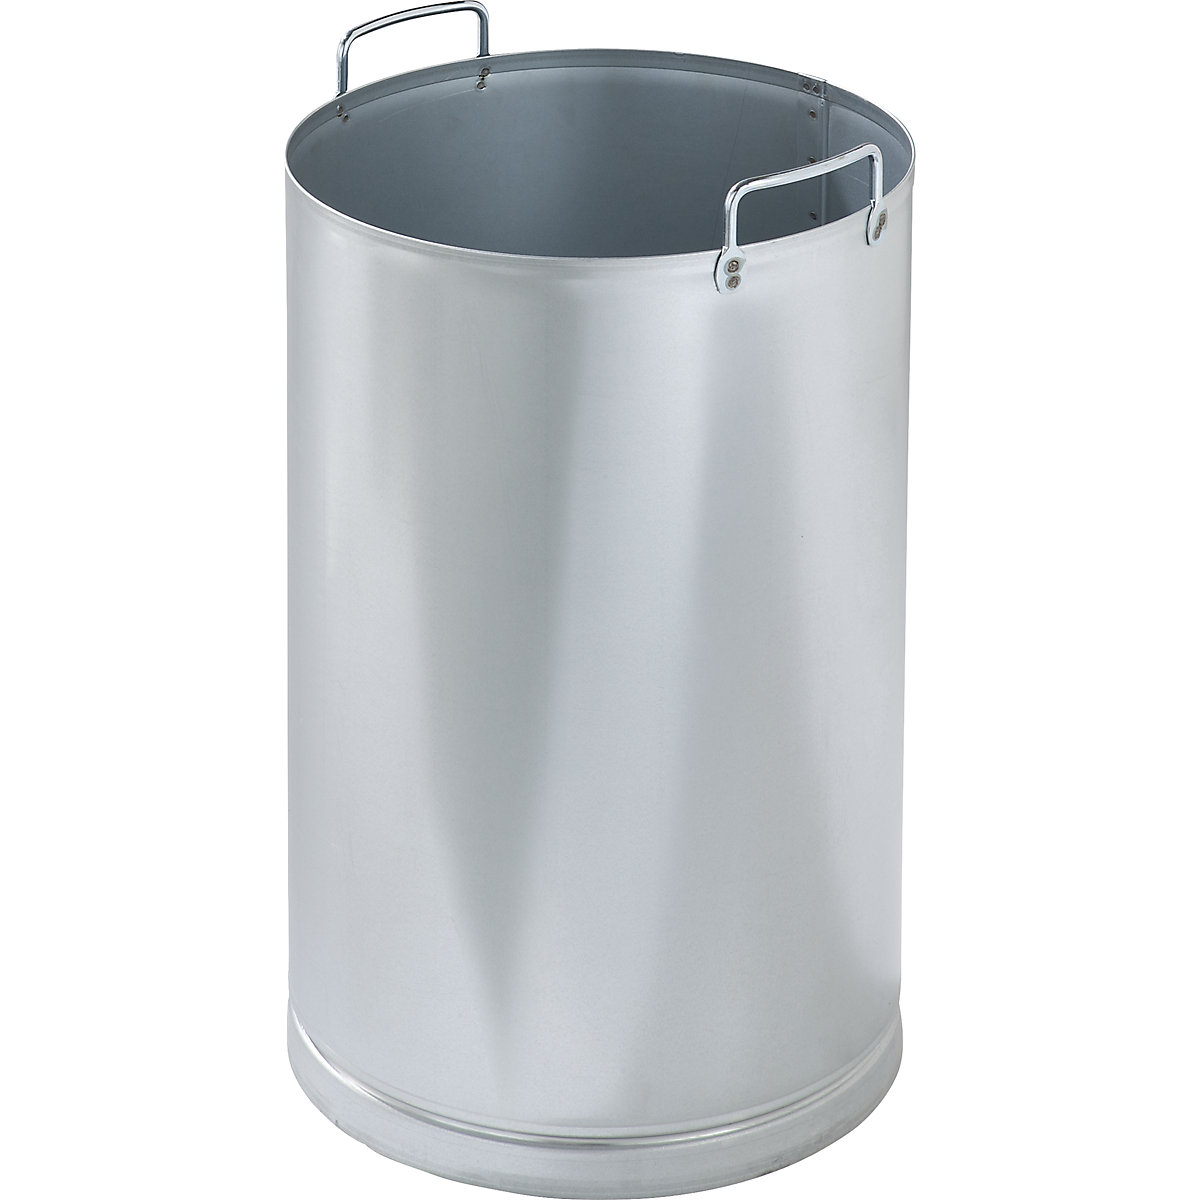 Zinc plated inner container – VAR